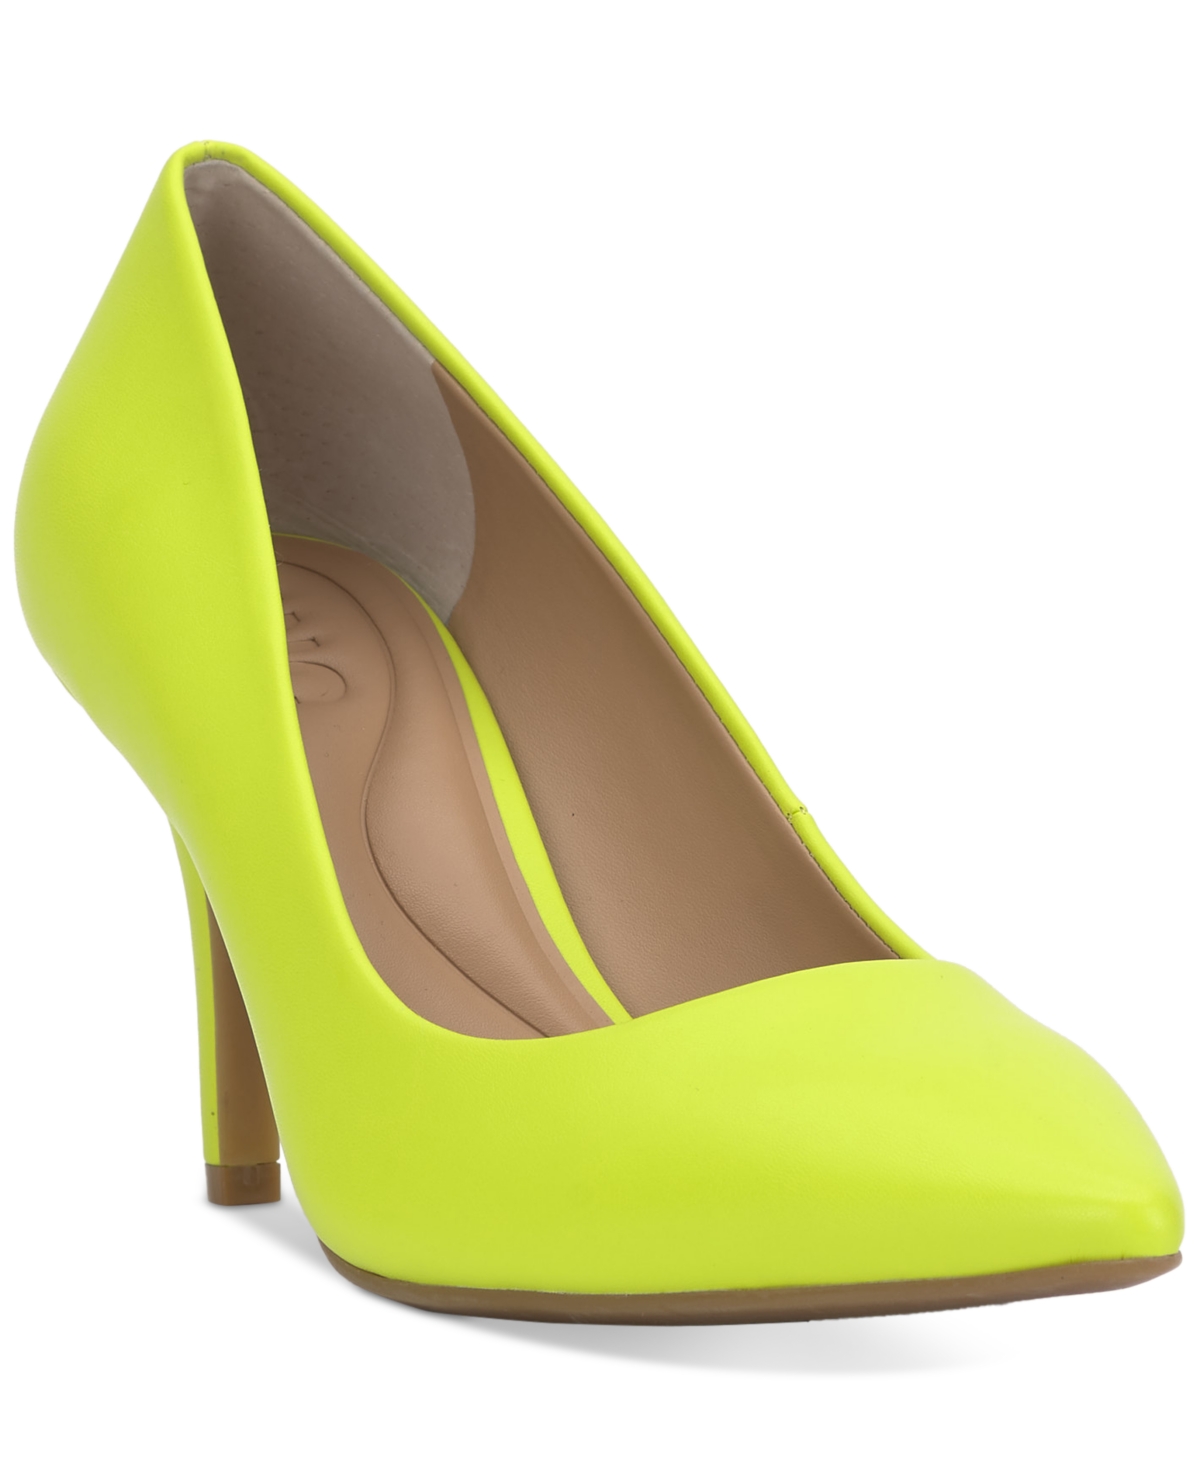 Women's Zitah Pointed Toe Pumps, Created for Macy's - Citron Patent